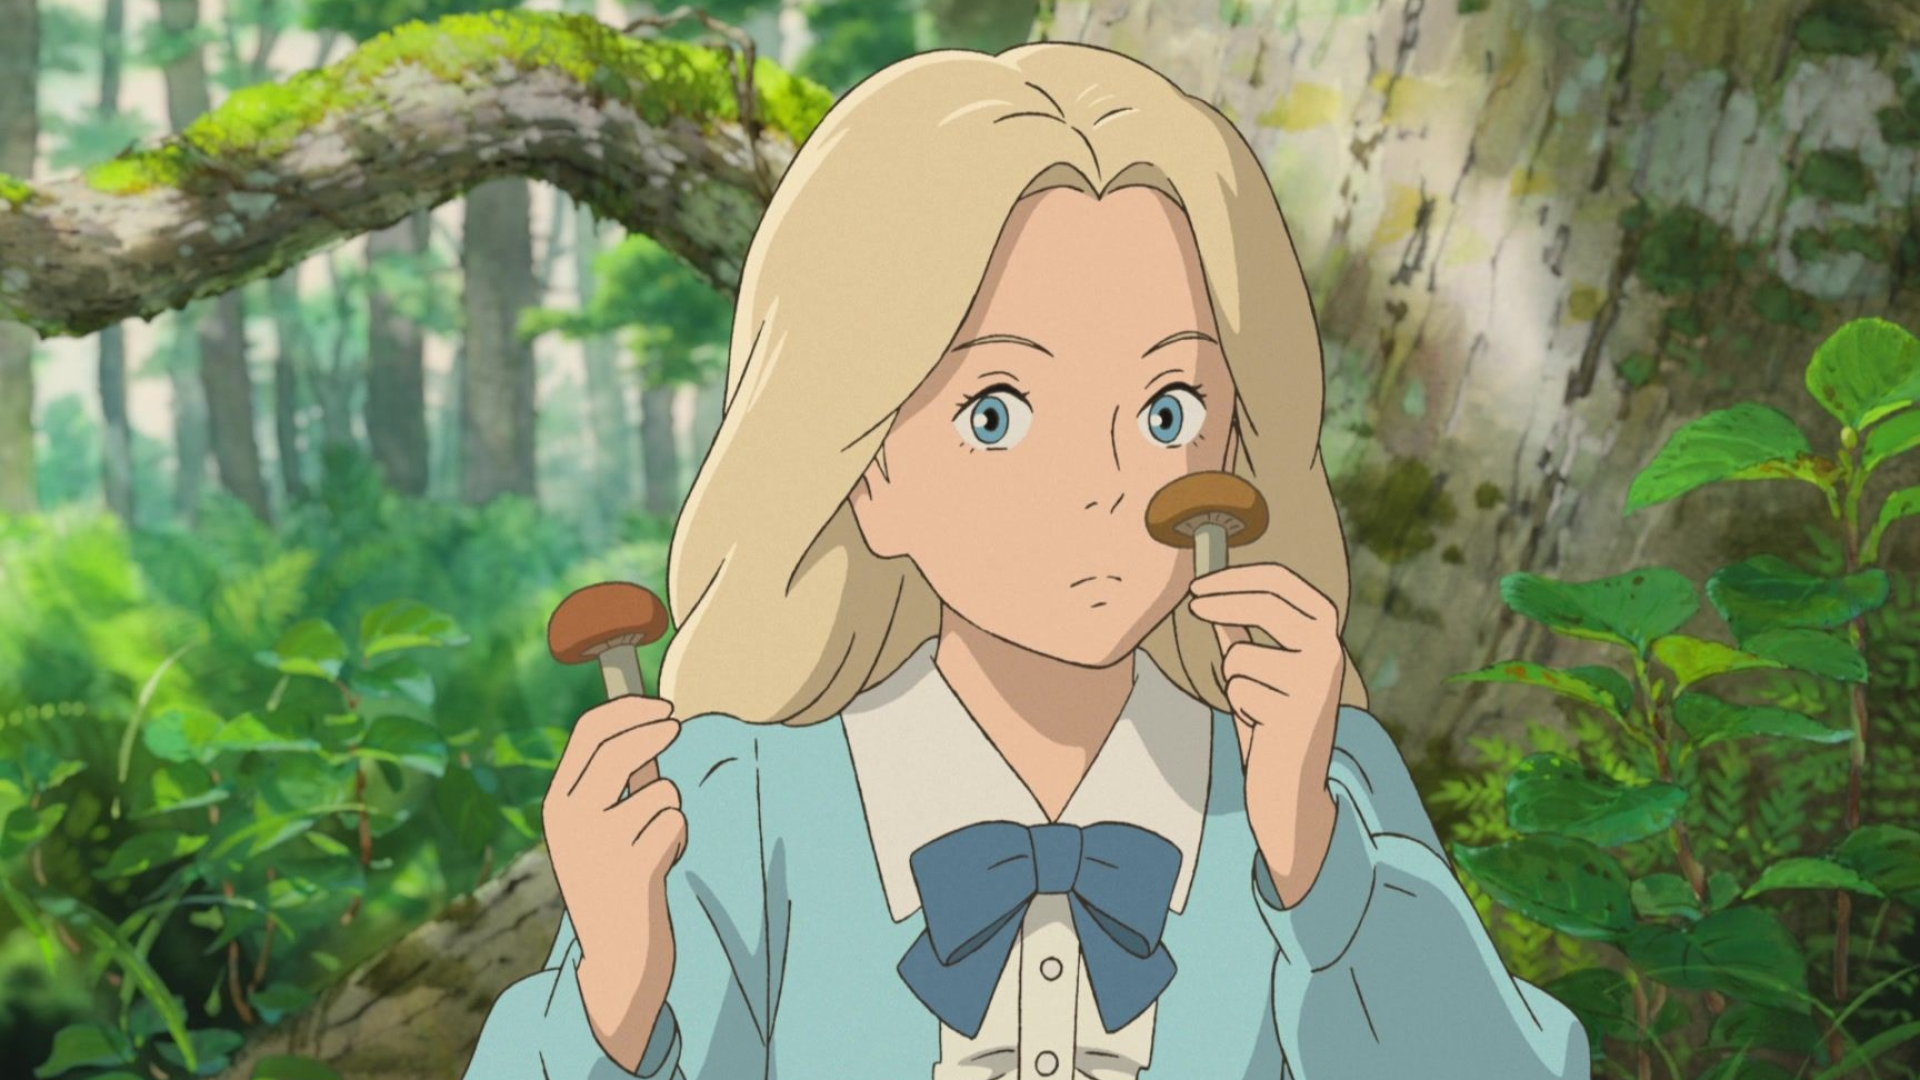 When Marnie Was There (Anime): Adventurous girl, Loves running in the forest, Picking mushrooms, Rowing in boats in the marsh. 1920x1080 Full HD Wallpaper.